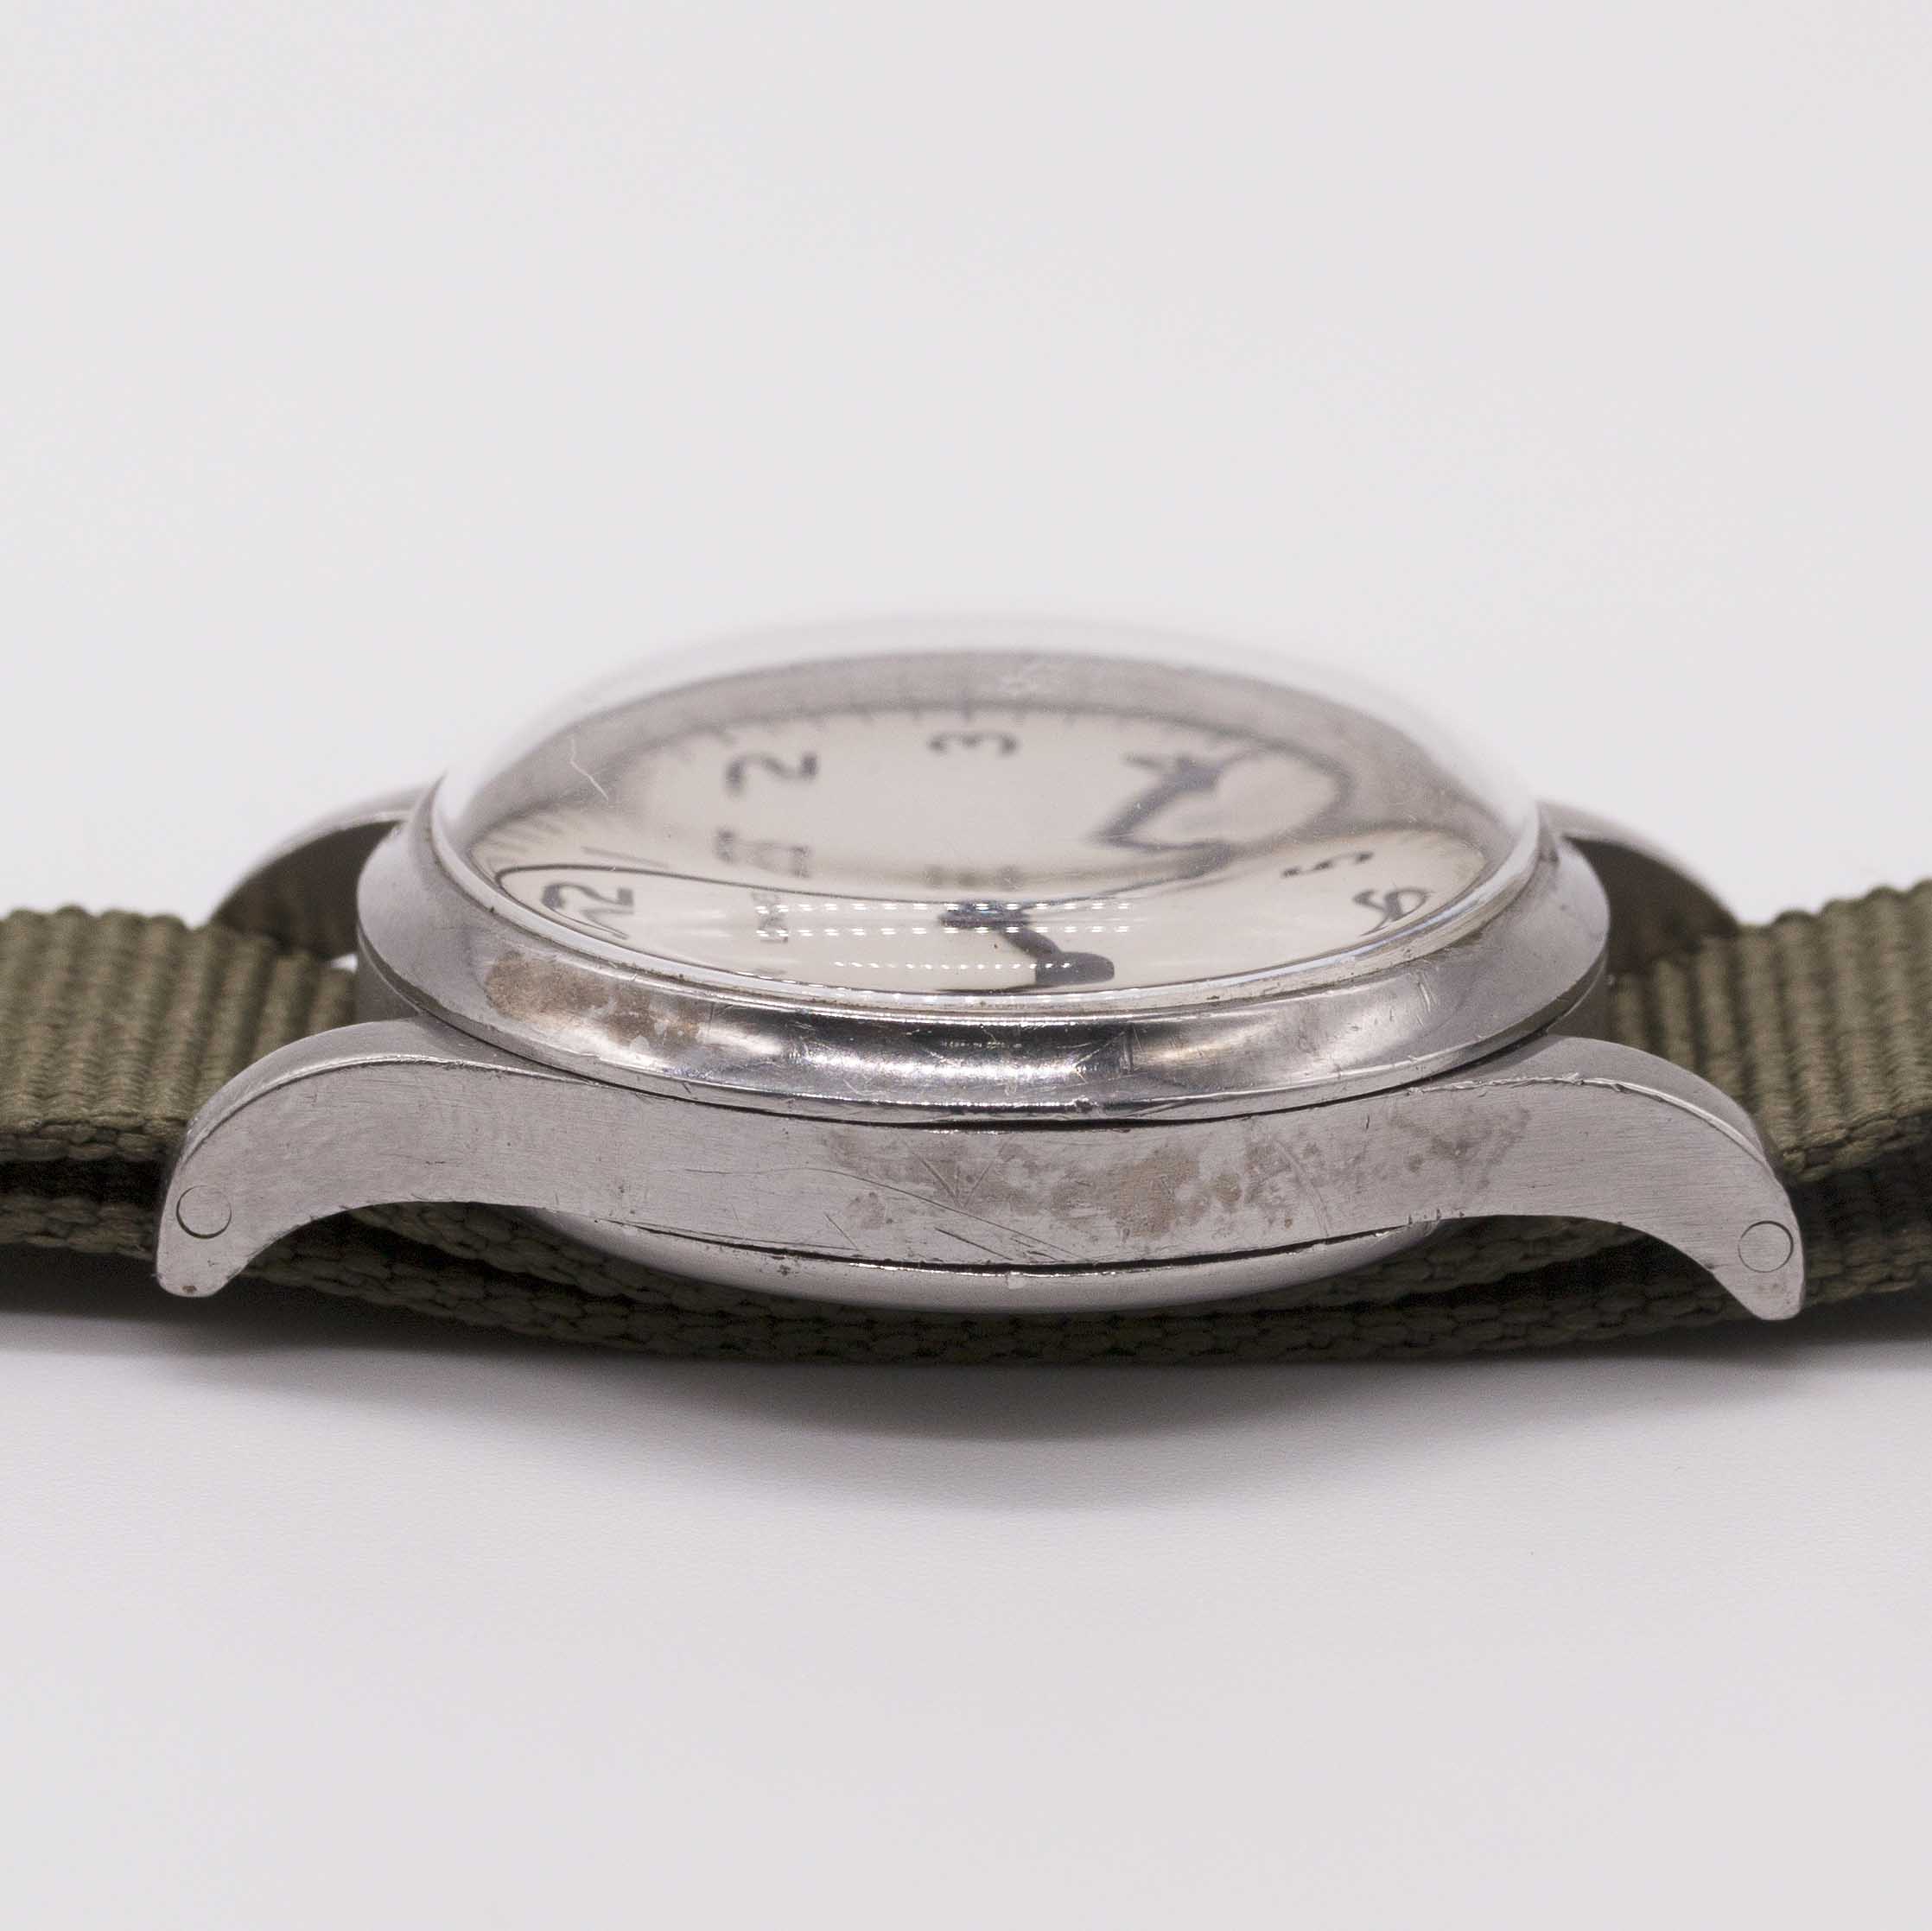 A GENTLEMAN'S BRITISH MILITARY LONGINES RAF PILOTS WRIST WATCH CIRCA 1940, WITH WHITE MOD DIAL - Image 9 of 9